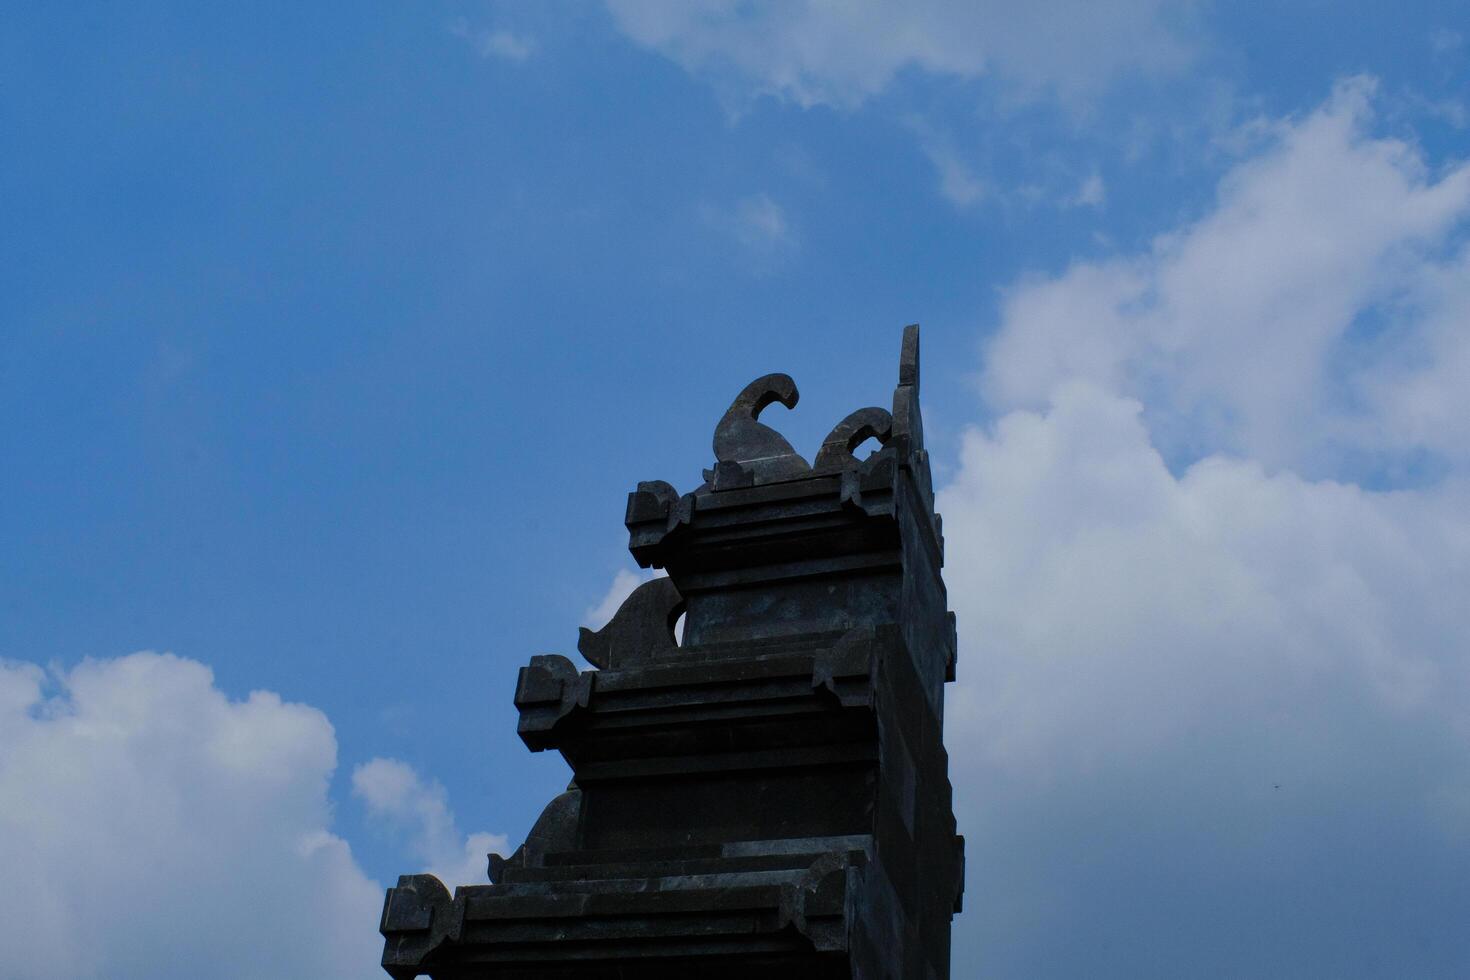 Architectural Photography. Architectural Beauty. View of the gate with a typical Balinese architectural style. Gate with view of cloudy blue sky. Bandung, Indonesia photo